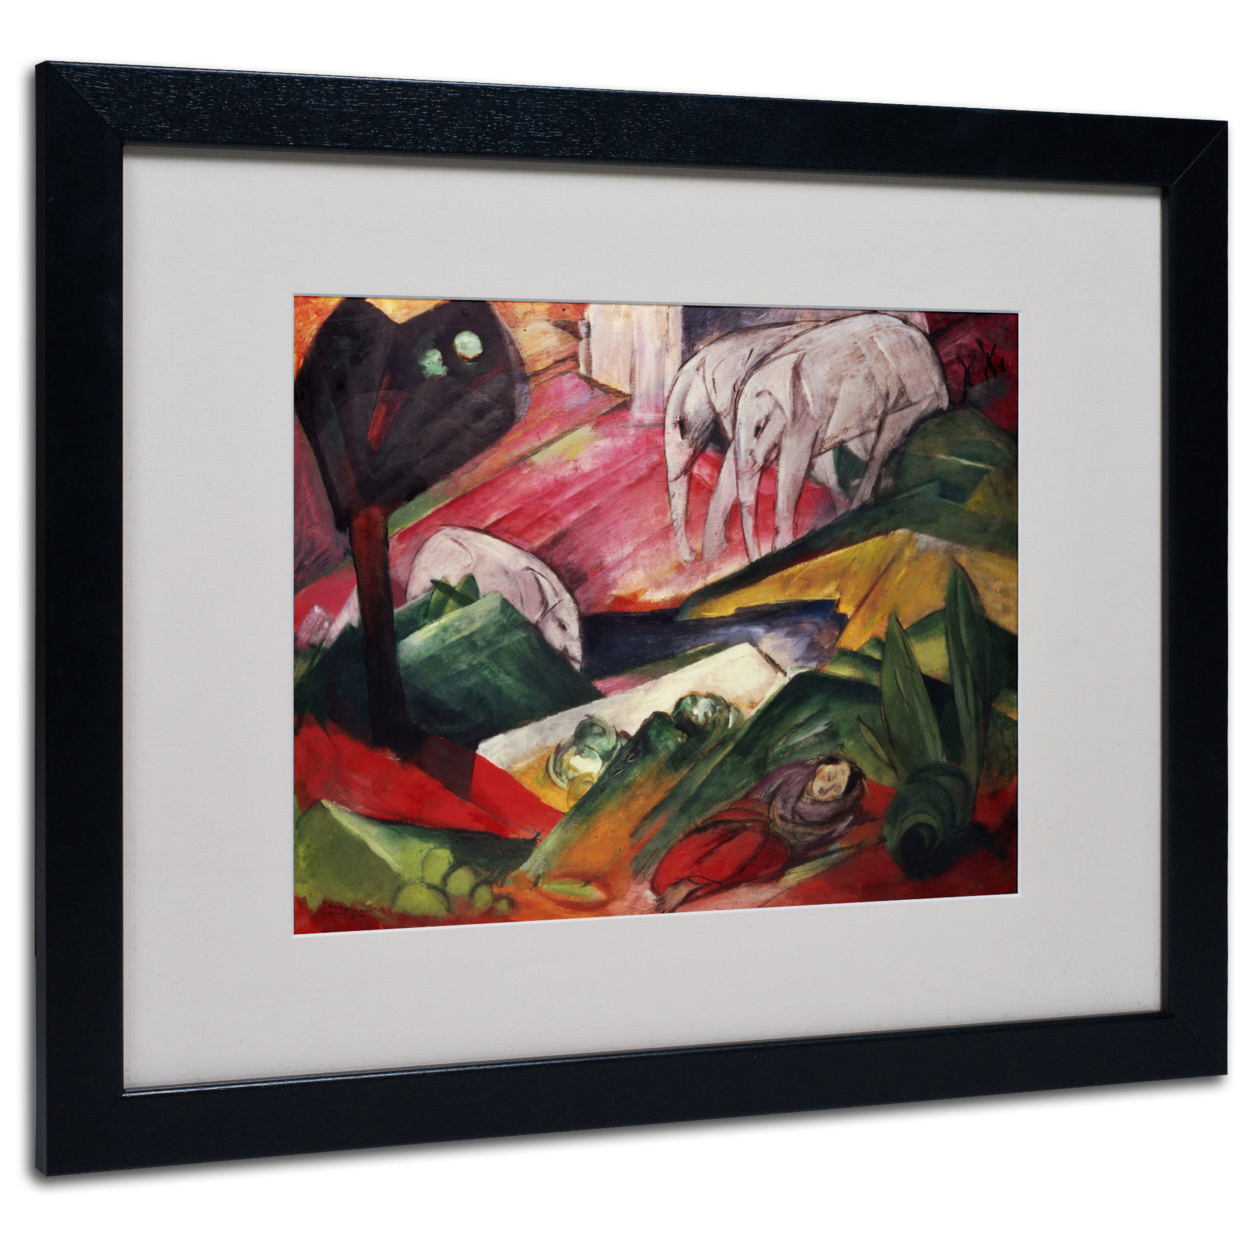 Franz Marc 'The Dream' Black Wooden Framed Art 18 X 22 Inches